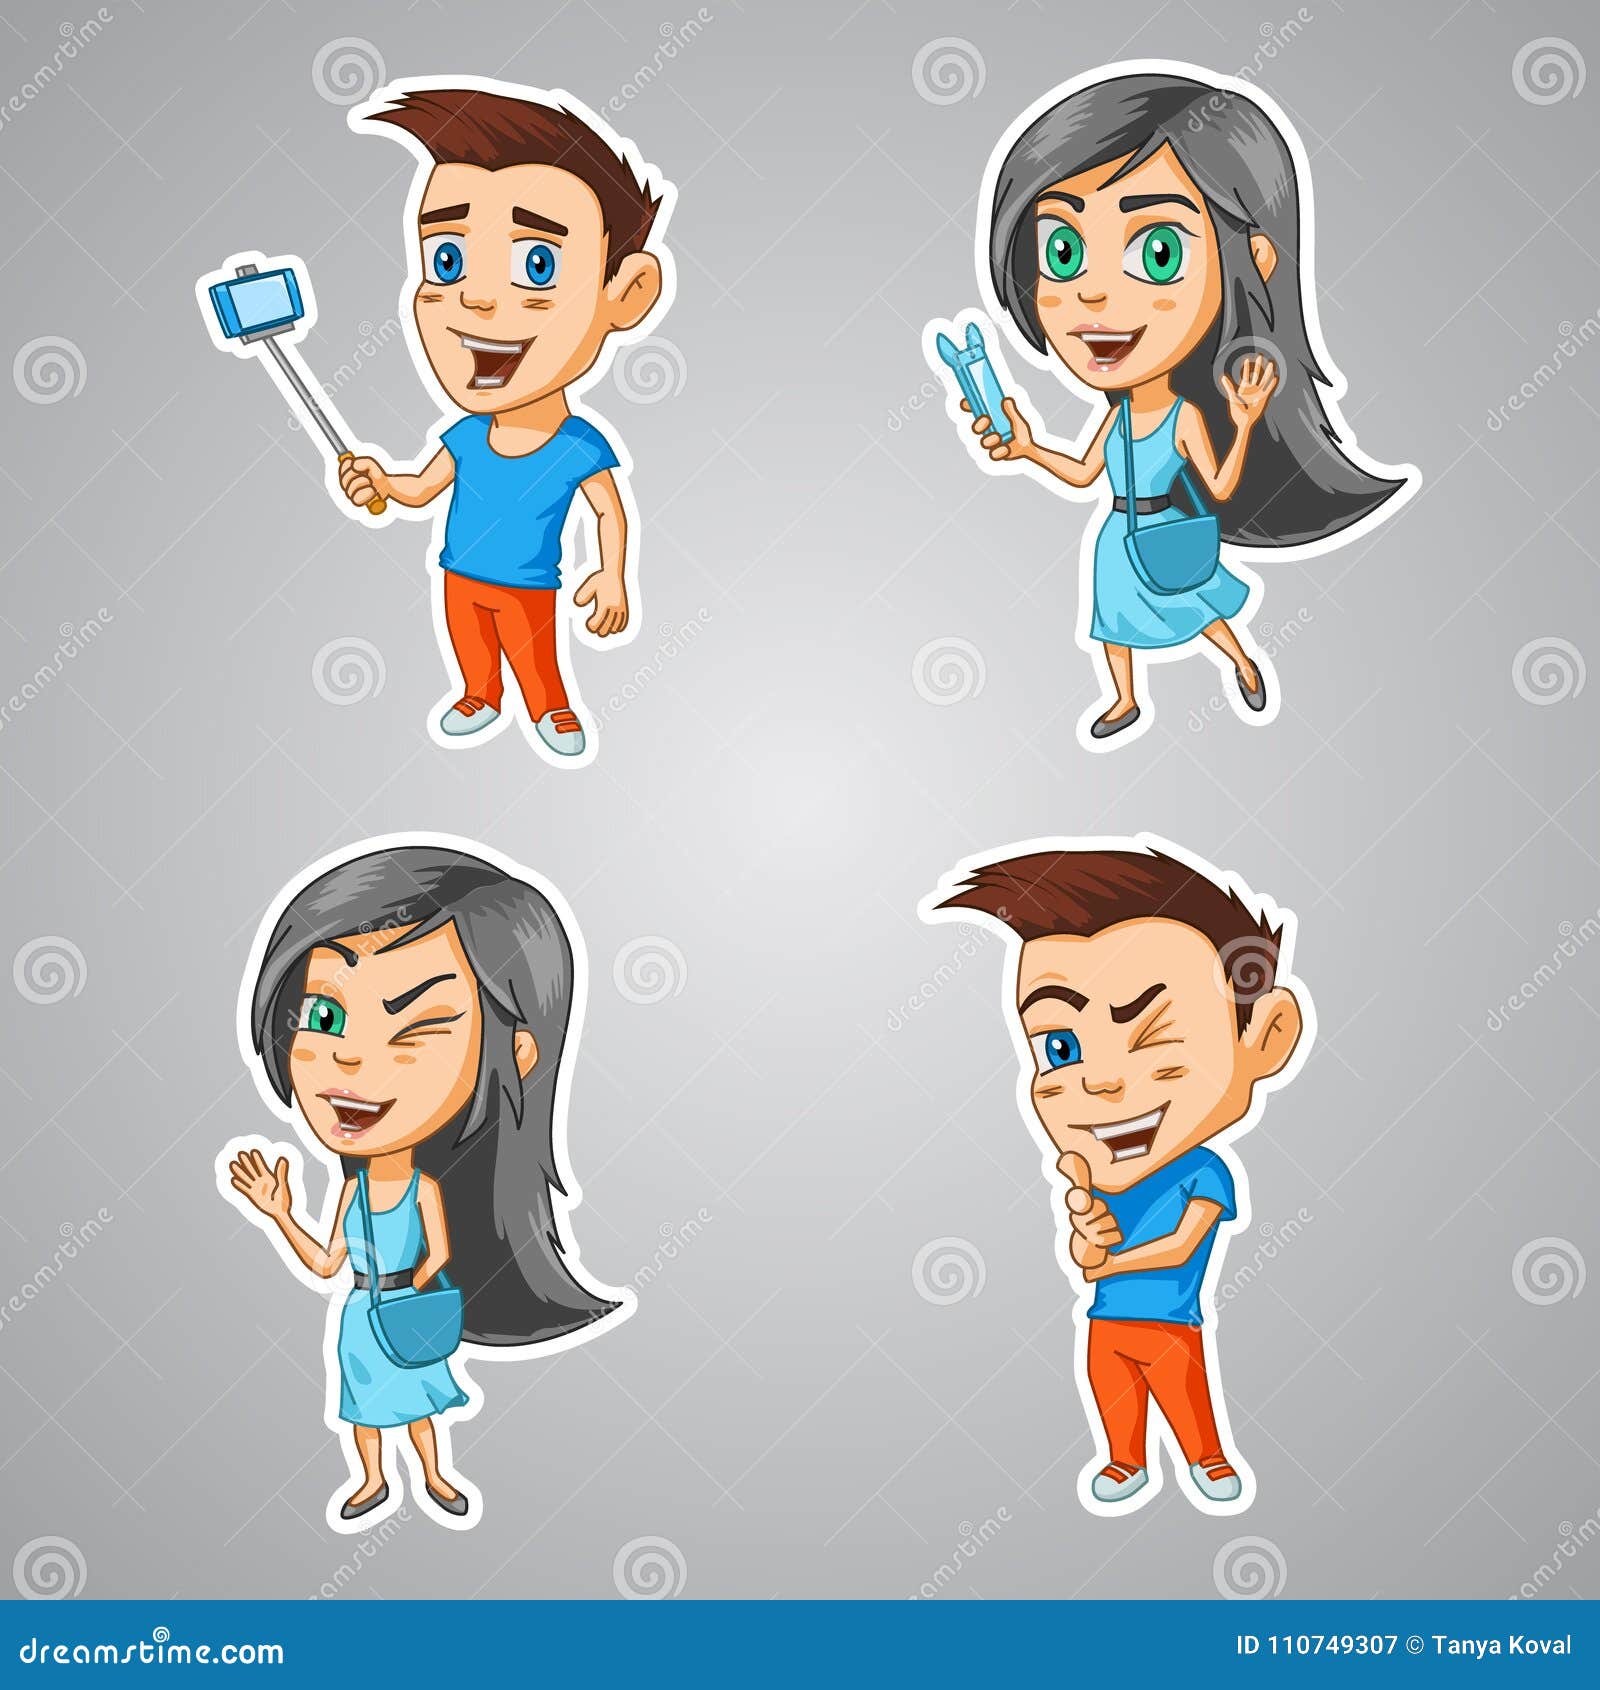 Modern Cartoon Characters Boy and Girl Bloggers with Gadgets in Their Hands  and Winks Stock Vector - Illustration of beauty, online: 110749307